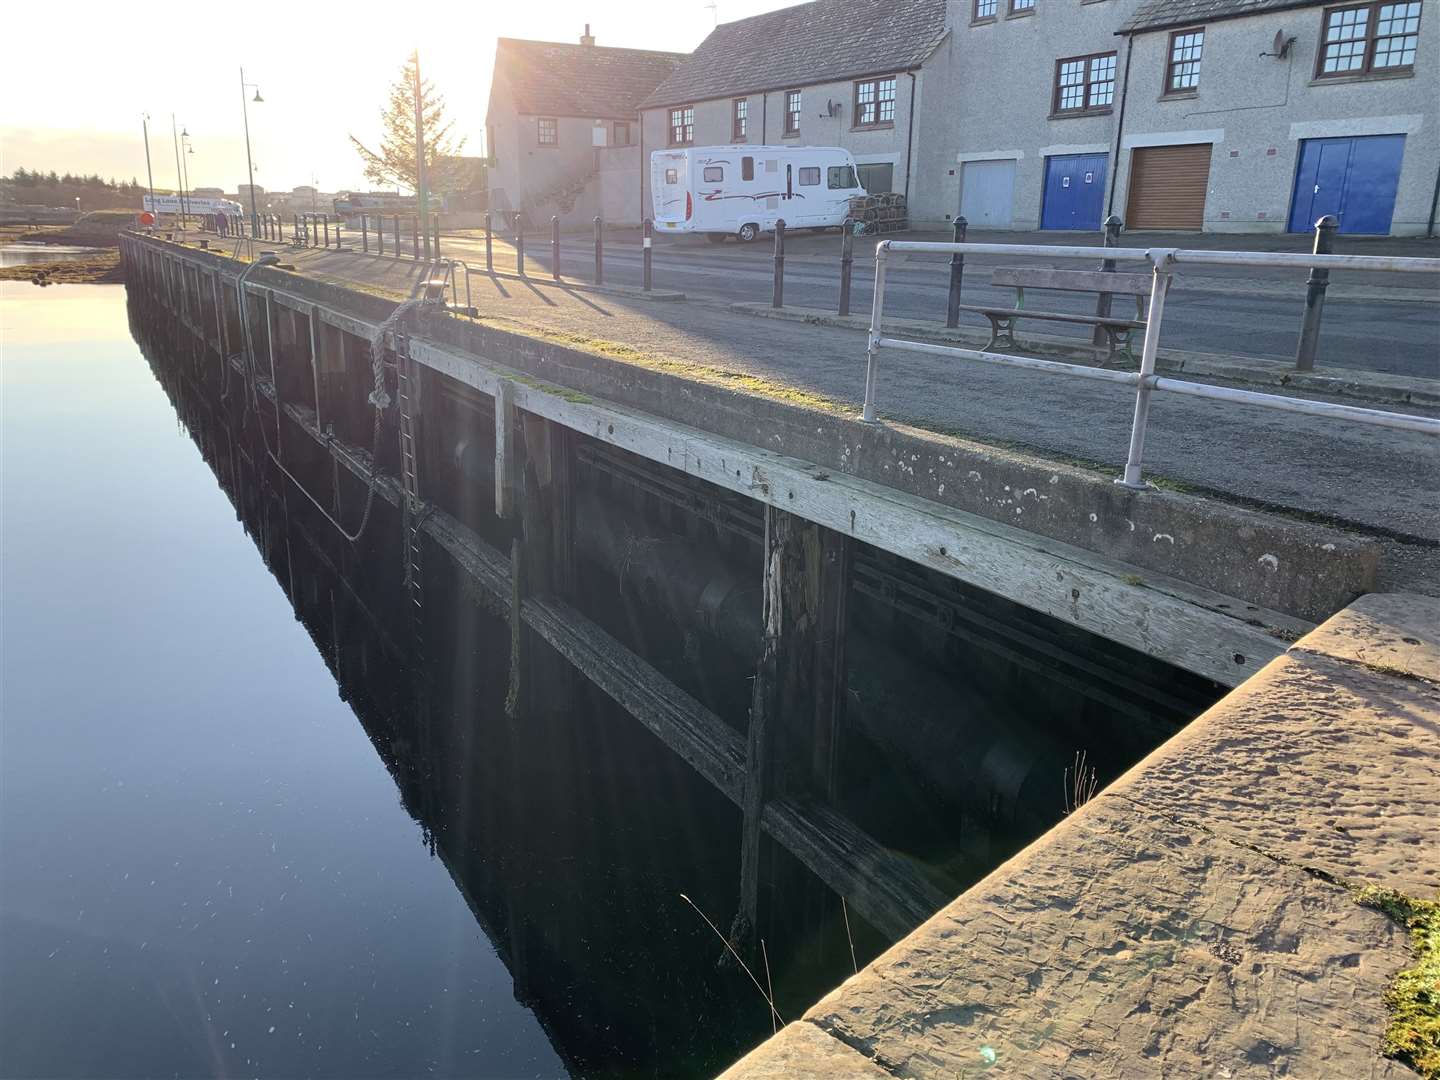 The concerns were centred on a part of the harbour area at Thurso's Riverside Road.